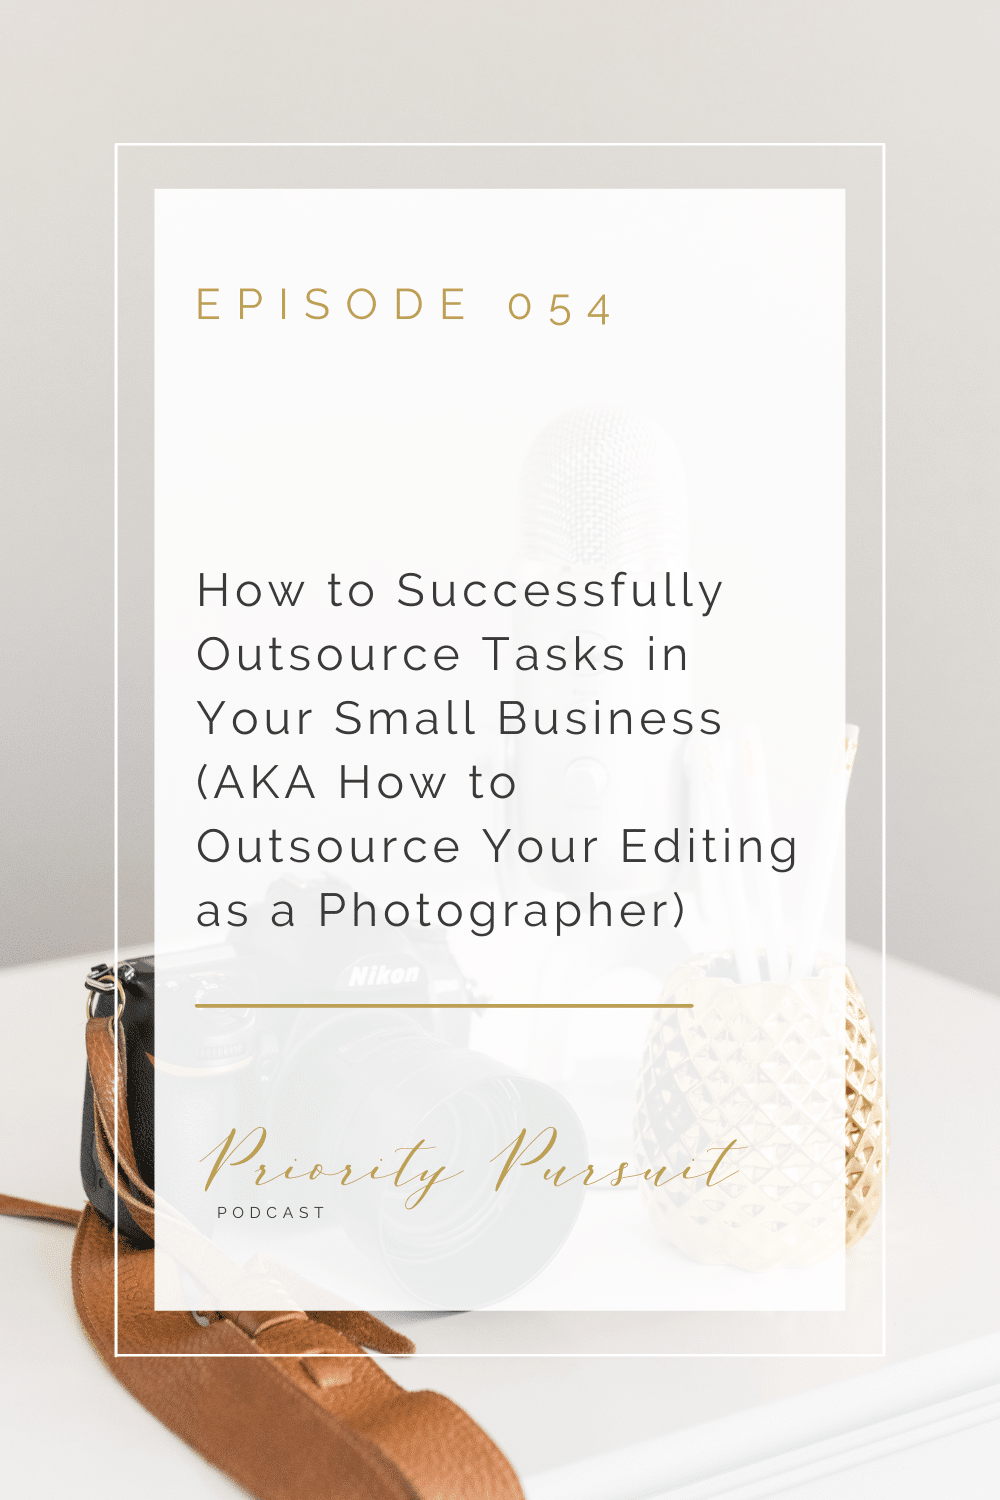 Victoria Rayburn shares how to successfully outsource tasks in your small business and how photographer’s can outsource their editing in this episode of “Priority Pursuit.”